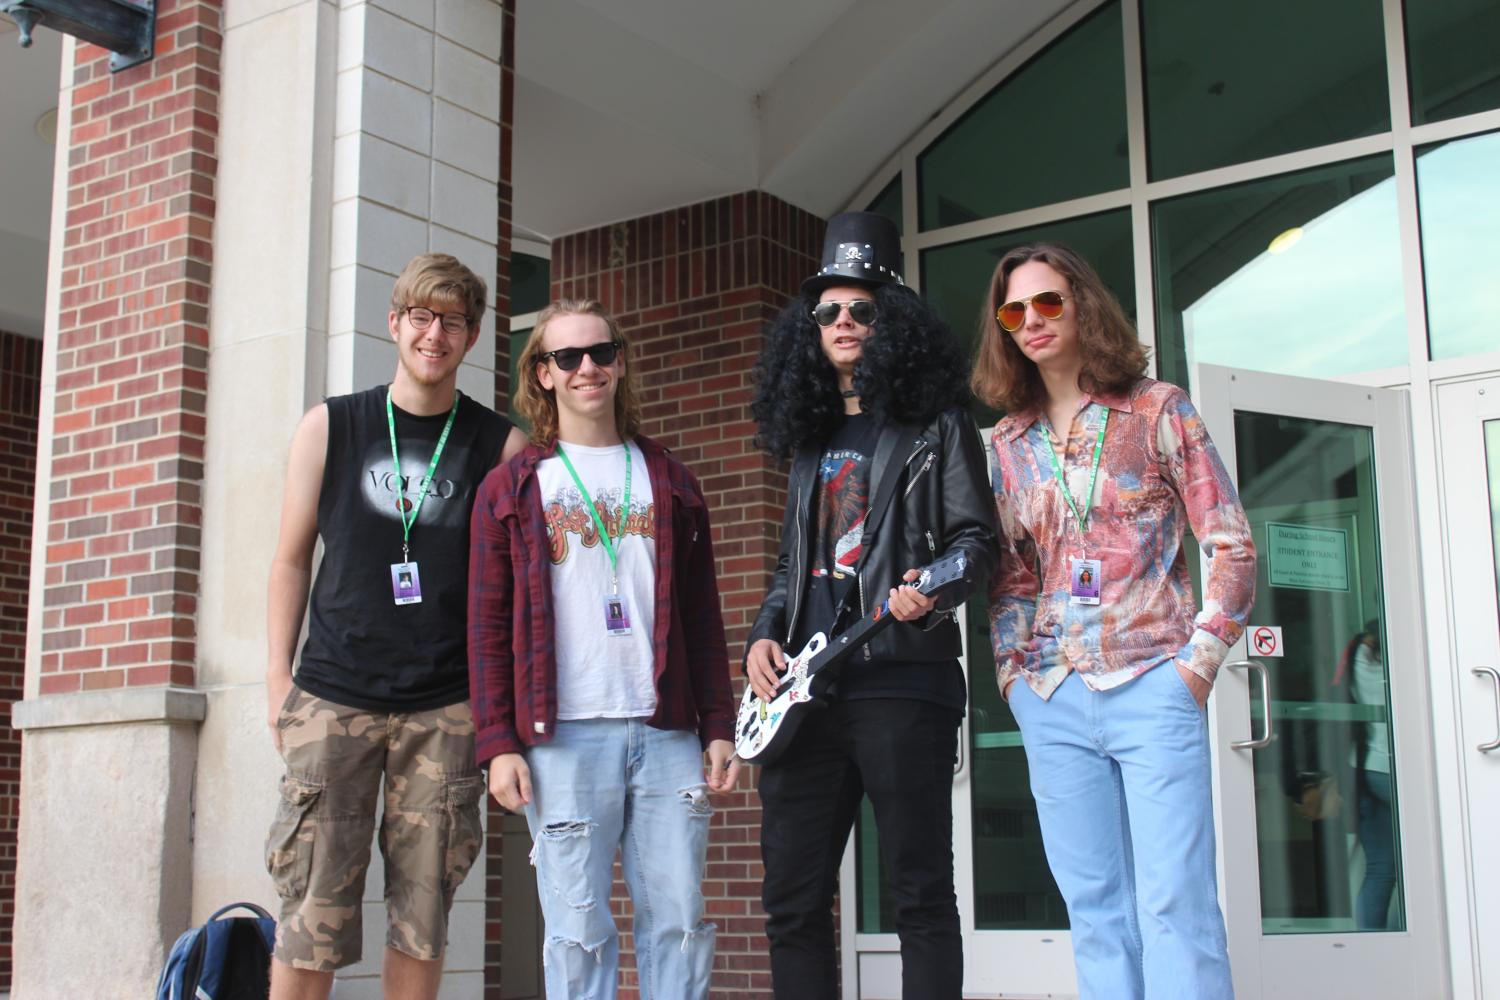 King of the Couch group Smells Like Duke Spirit, consisting of (from left) Michael Ryan, Chris Rieger, Clay Lynam and Julian Race, rock n rolls out Duke pride with their music inspired outfits. 